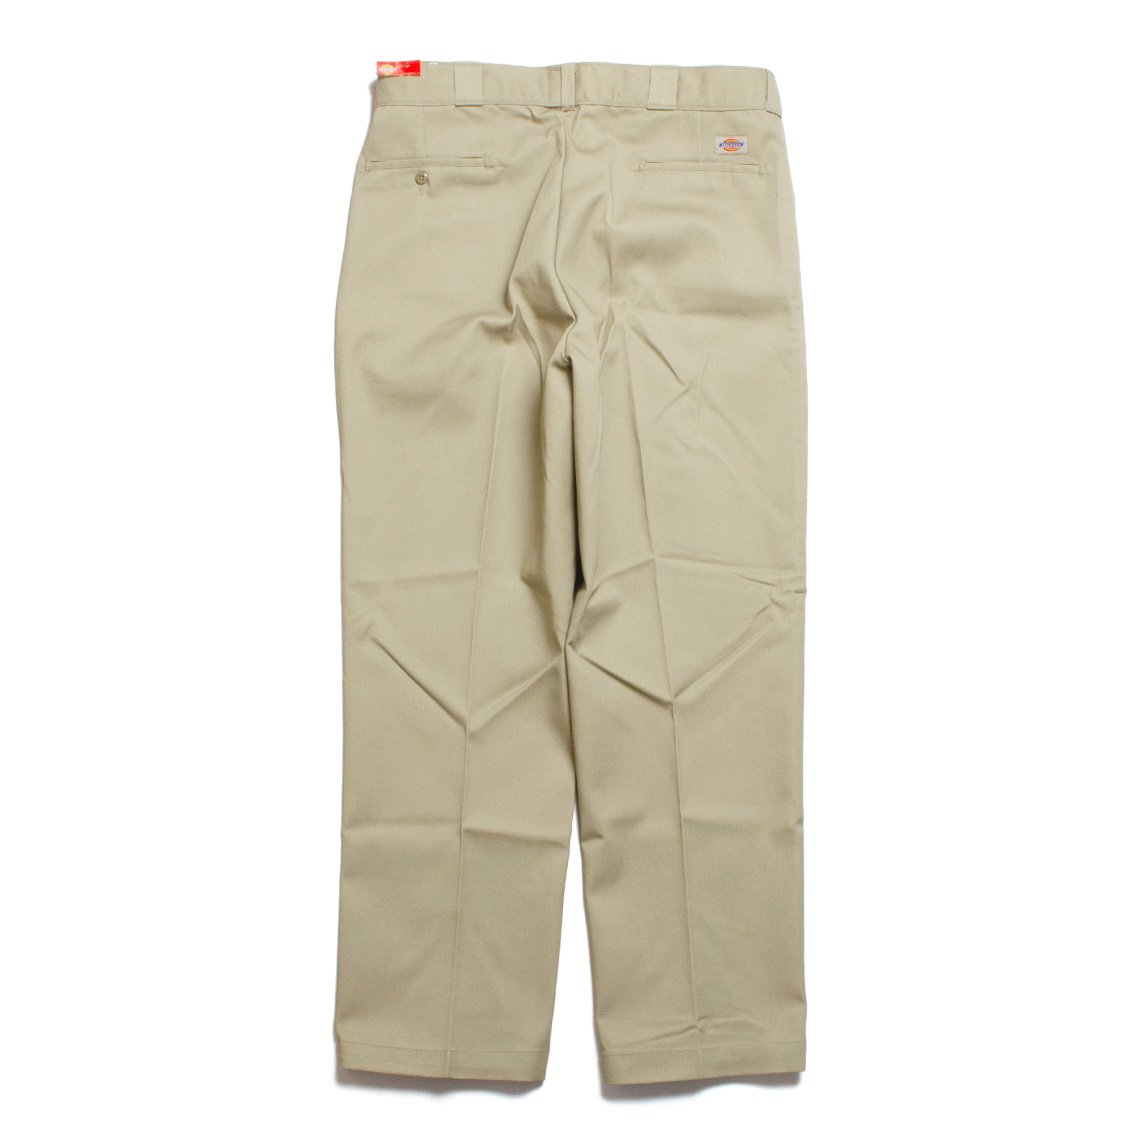 Dickies / ディッキーズ]874 Work Pants 90s ワークパンツ アメリカ製